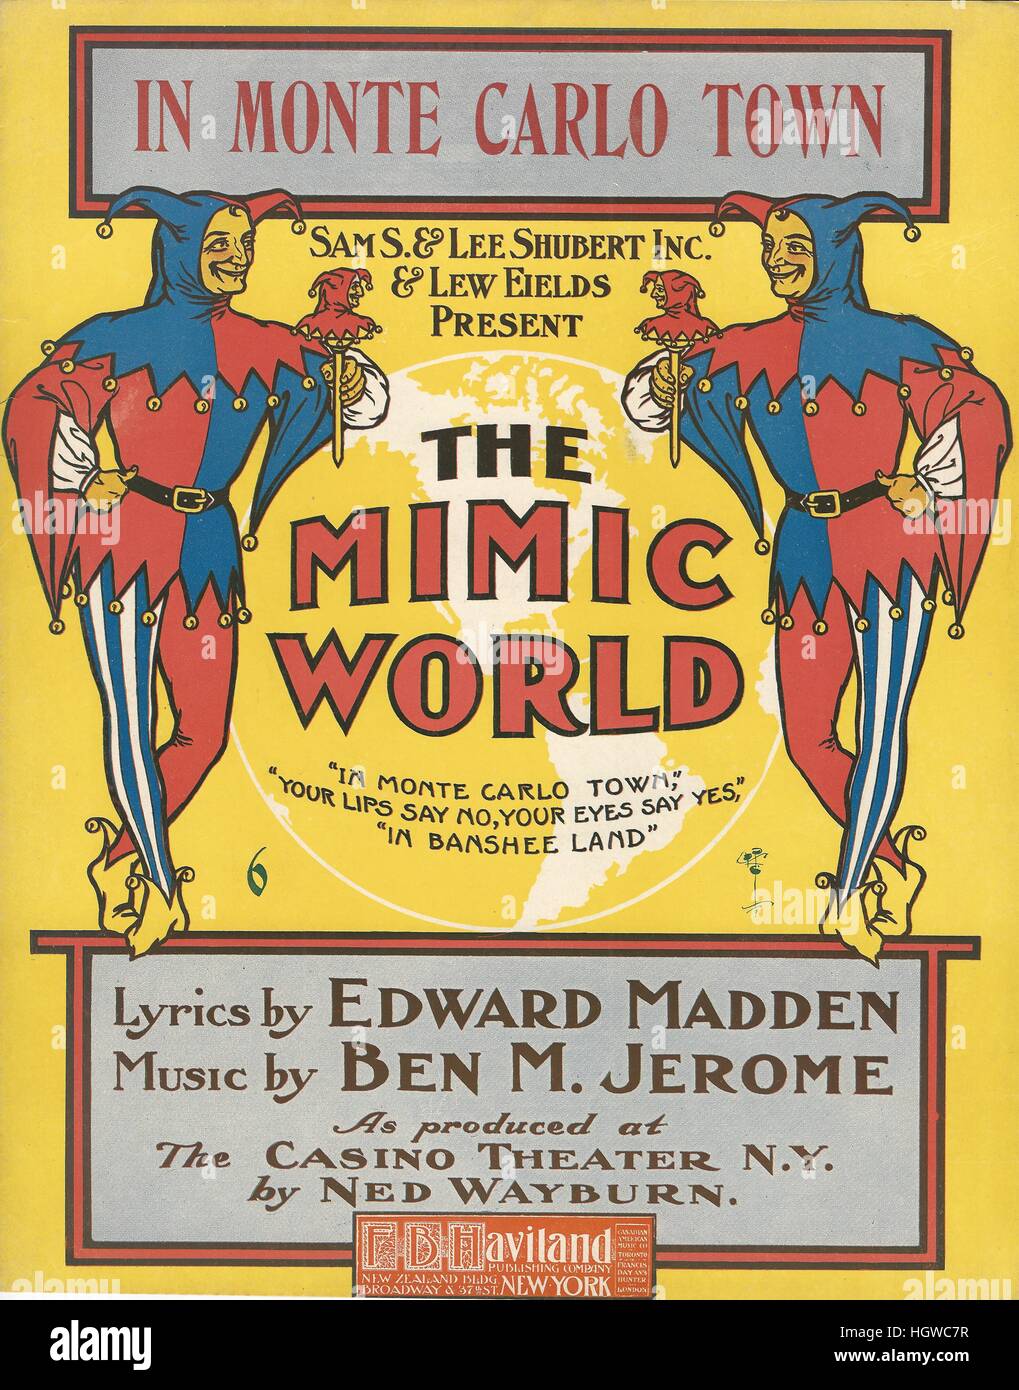 'In Monte Carlo Town' from the 1908 Musical 'The Mimic World' Sheet Music Cover Stock Photo